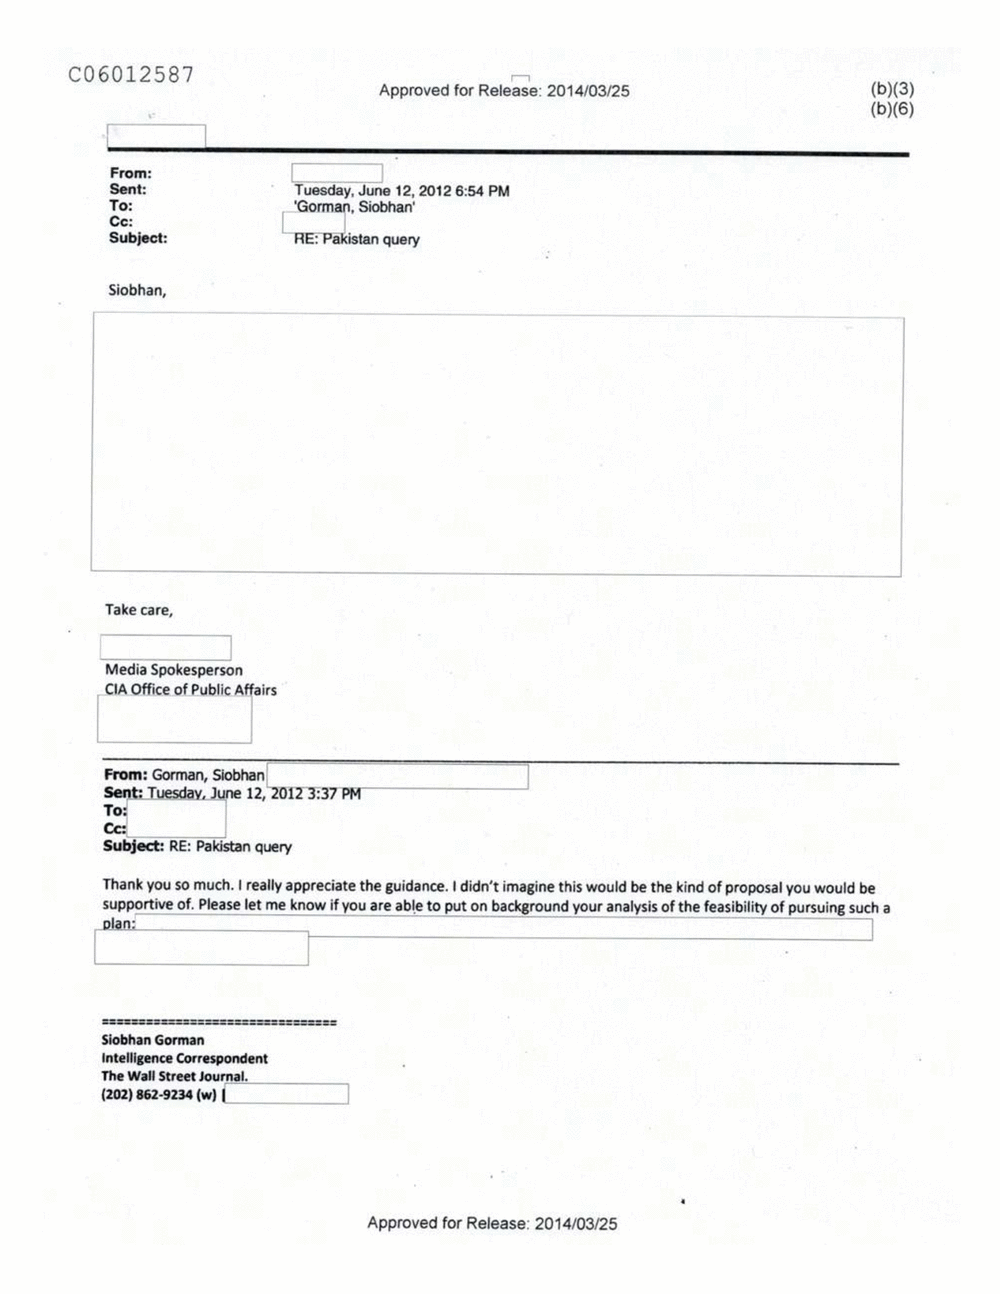 Page 133 from Email Correspondence Between Reporters and CIA Flacks